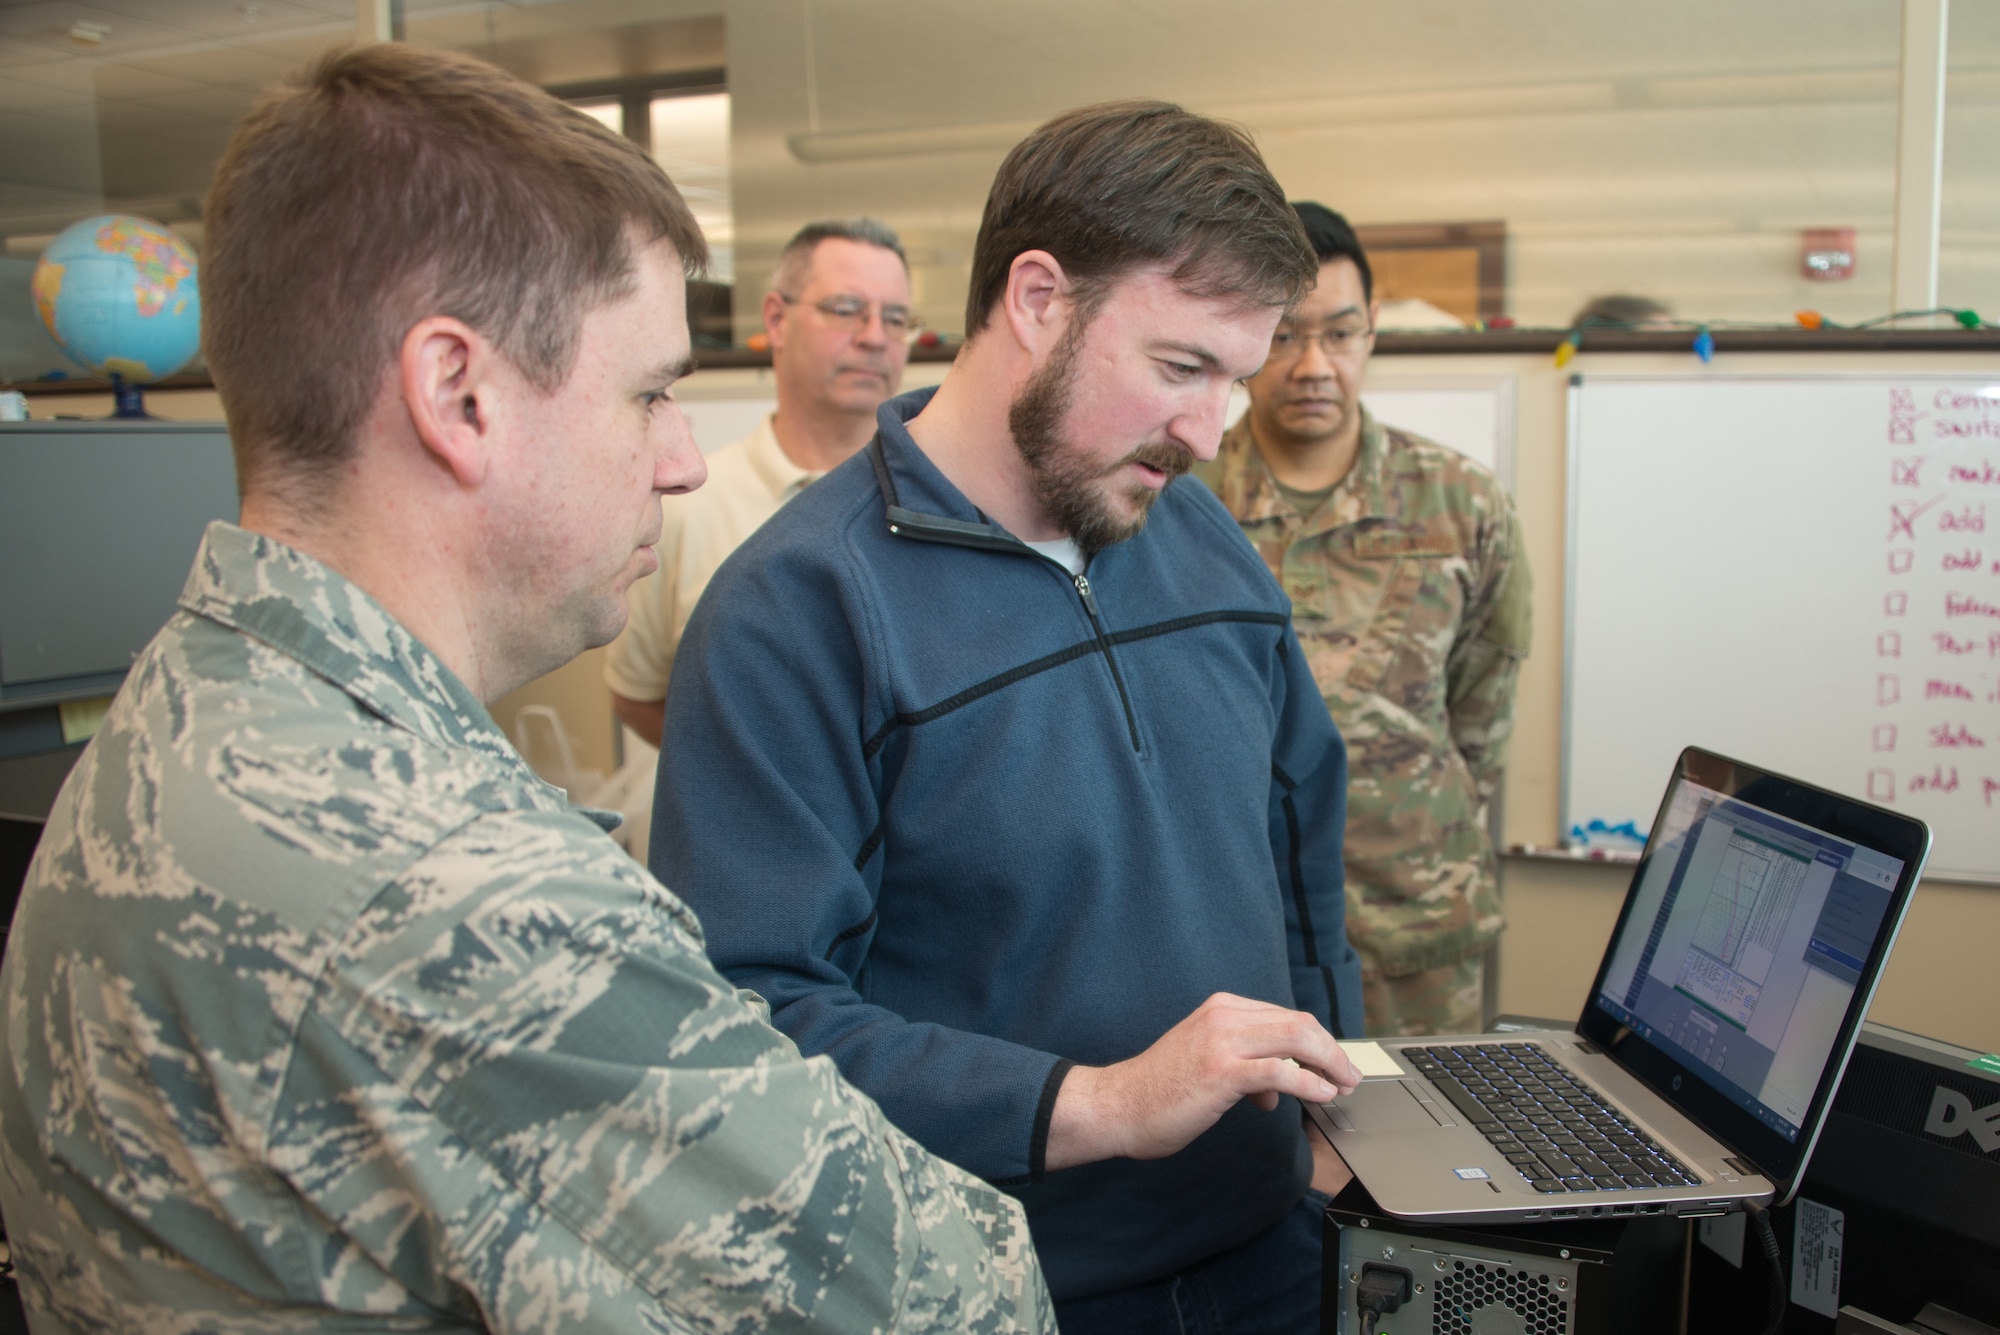 Airmen from the 16th Weather Squadron test software written as part of Exercise Adaptive Lightning 19, Task Force Bat Phone, at Offutt Air Force Base, Nebraska, Feb. 26, 2019. Task Force Bat Phone is a 2nd Weather Group project that uses off-the-shelf technology combined with rapid development techniques to deliver new communication capabilities to deployed forecasters in contested, degraded or operationally-limited environments. (U.S. Air Force photo by Paul Shirk)